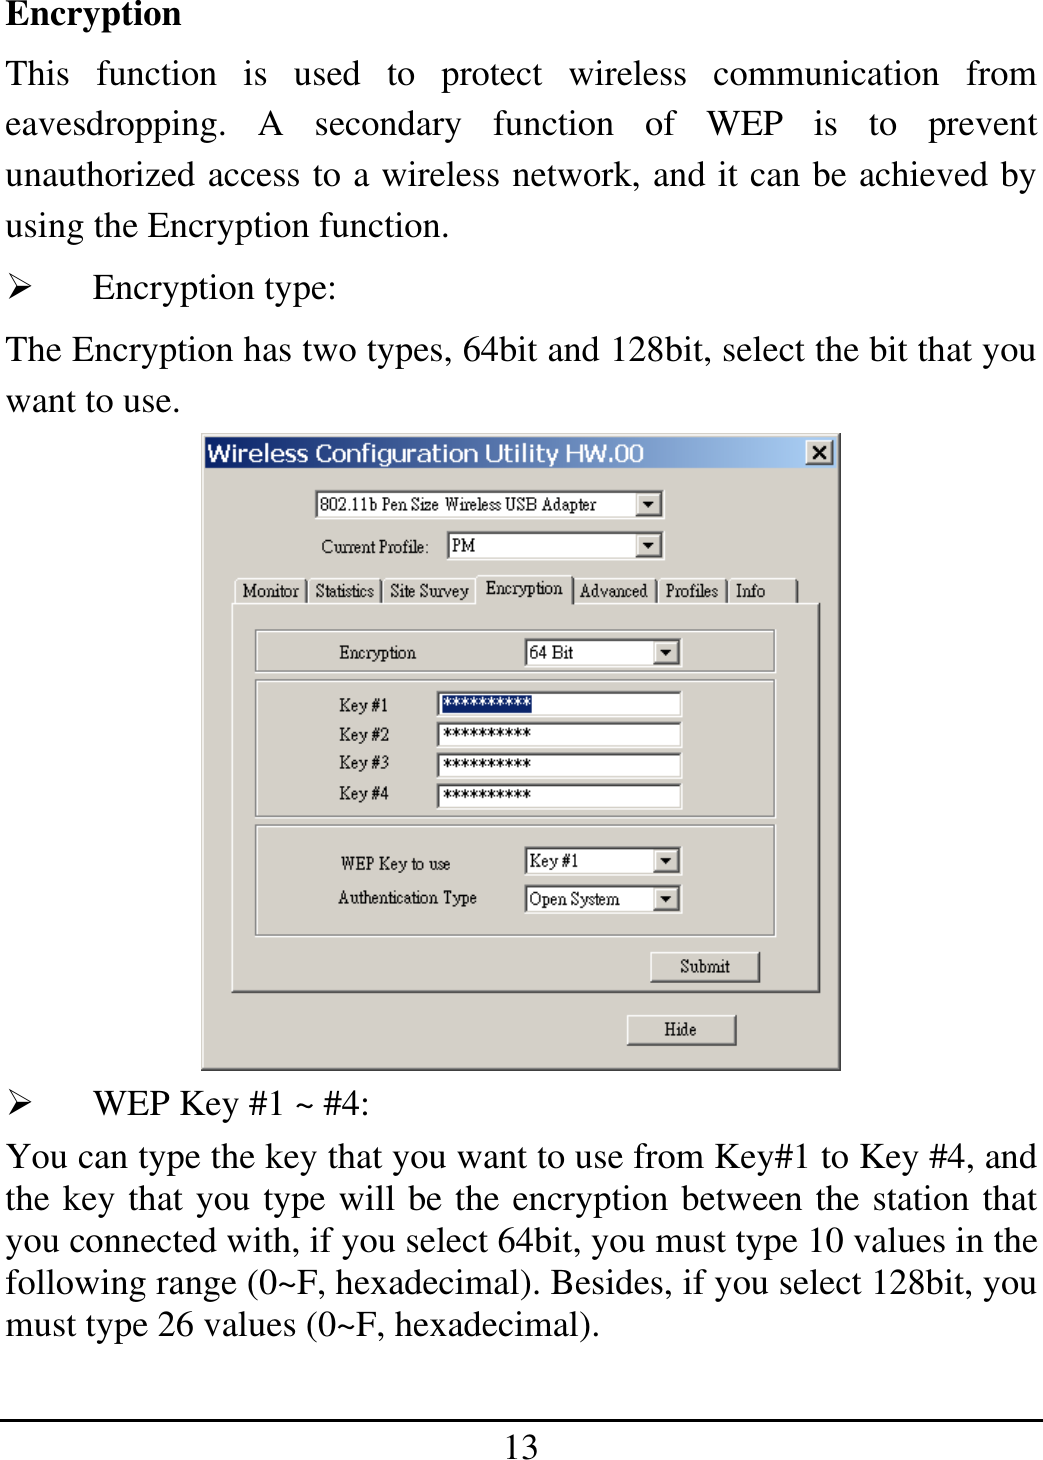 13 Encryption This function is used to protect wireless communication from eavesdropping. A secondary function of WEP is to prevent unauthorized access to a wireless network, and it can be achieved by using the Encryption function.   Encryption type:  The Encryption has two types, 64bit and 128bit, select the bit that you want to use.    WEP Key #1 ~ #4:  You can type the key that you want to use from Key#1 to Key #4, and the key that you type will be the encryption between the station that you connected with, if you select 64bit, you must type 10 values in the following range (0~F, hexadecimal). Besides, if you select 128bit, you must type 26 values (0~F, hexadecimal). 